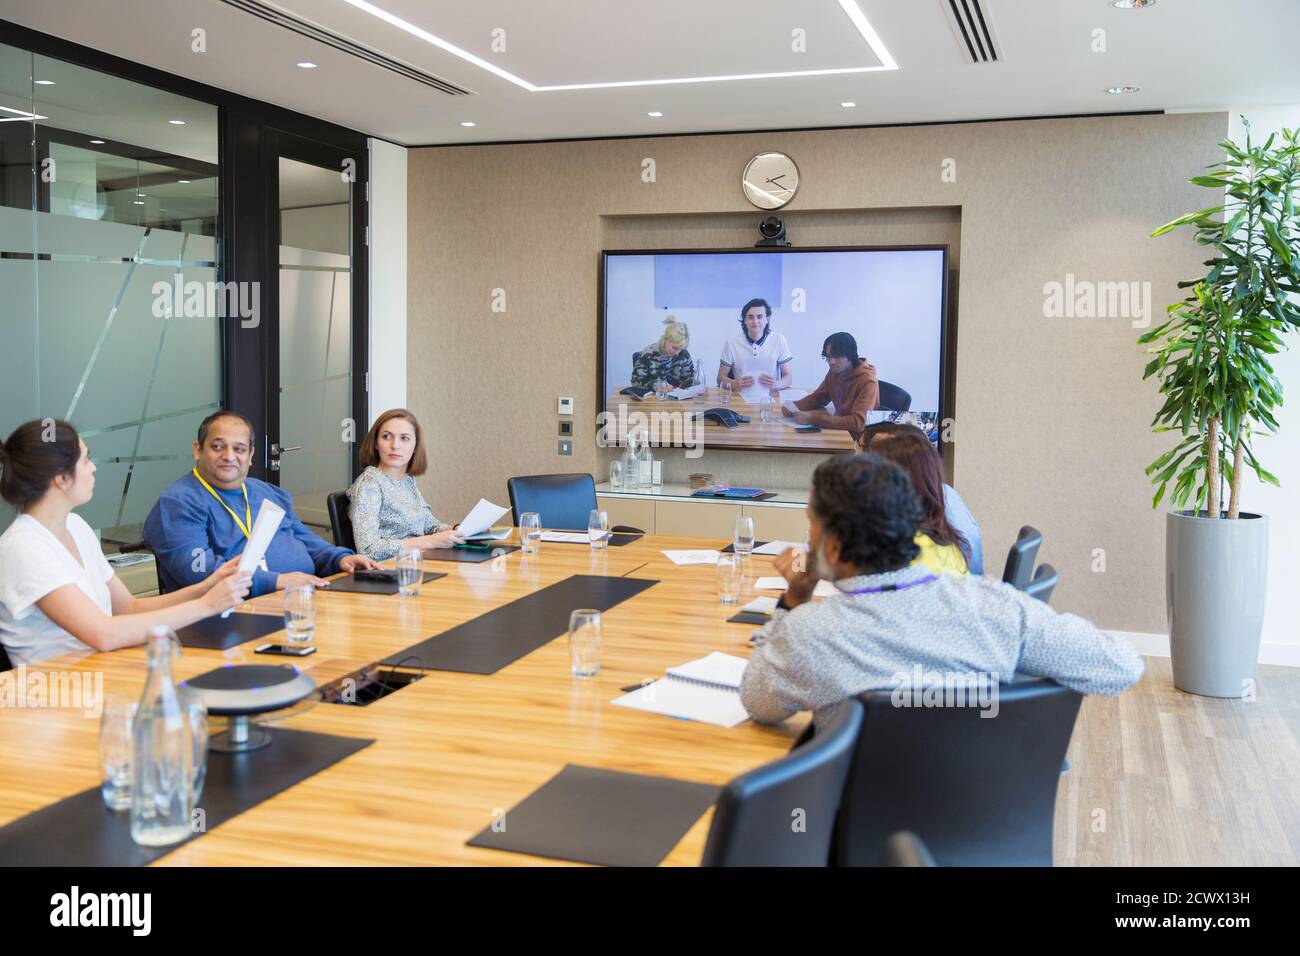 Business people video conferencing in conference room meeting Stock Photo